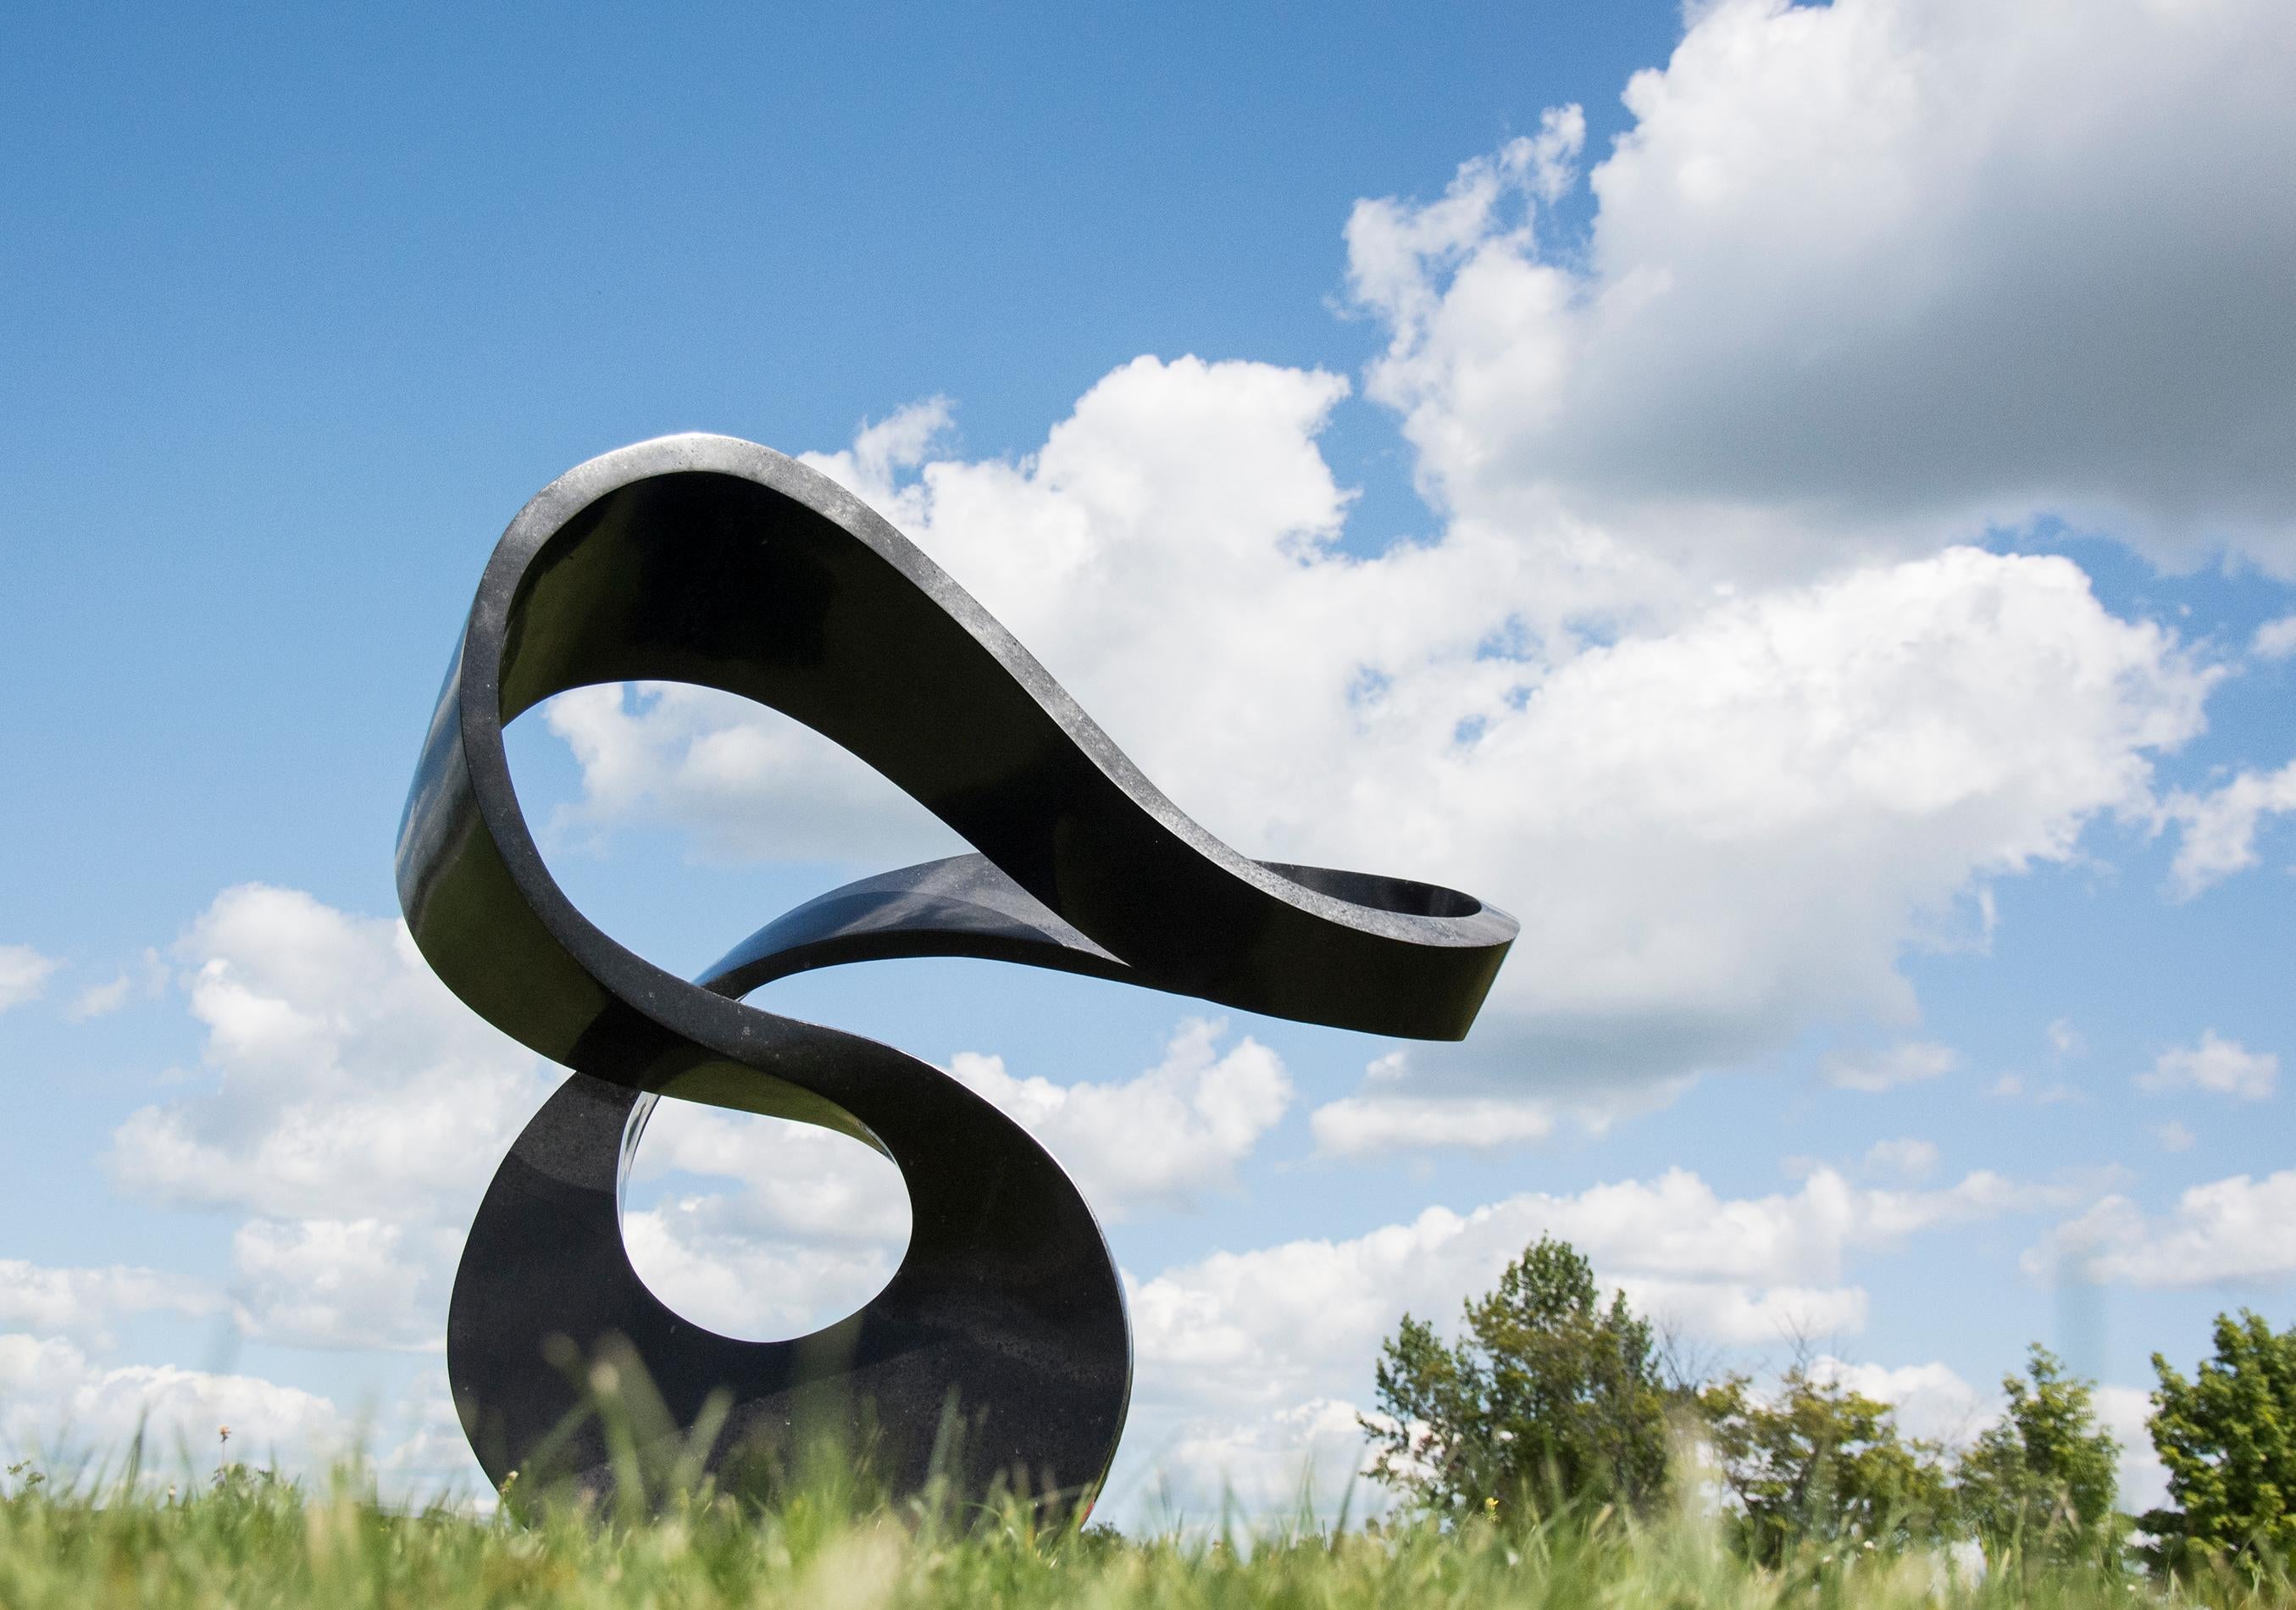 This sculpture is number 10 out of 50 and can be purchased on a commission basis, please allow 8 - 12 weeks before shipping. The sculpture weighs approximately 970 lbs and has a steel substructure for installation.

Smooth-surfaced, black granite,